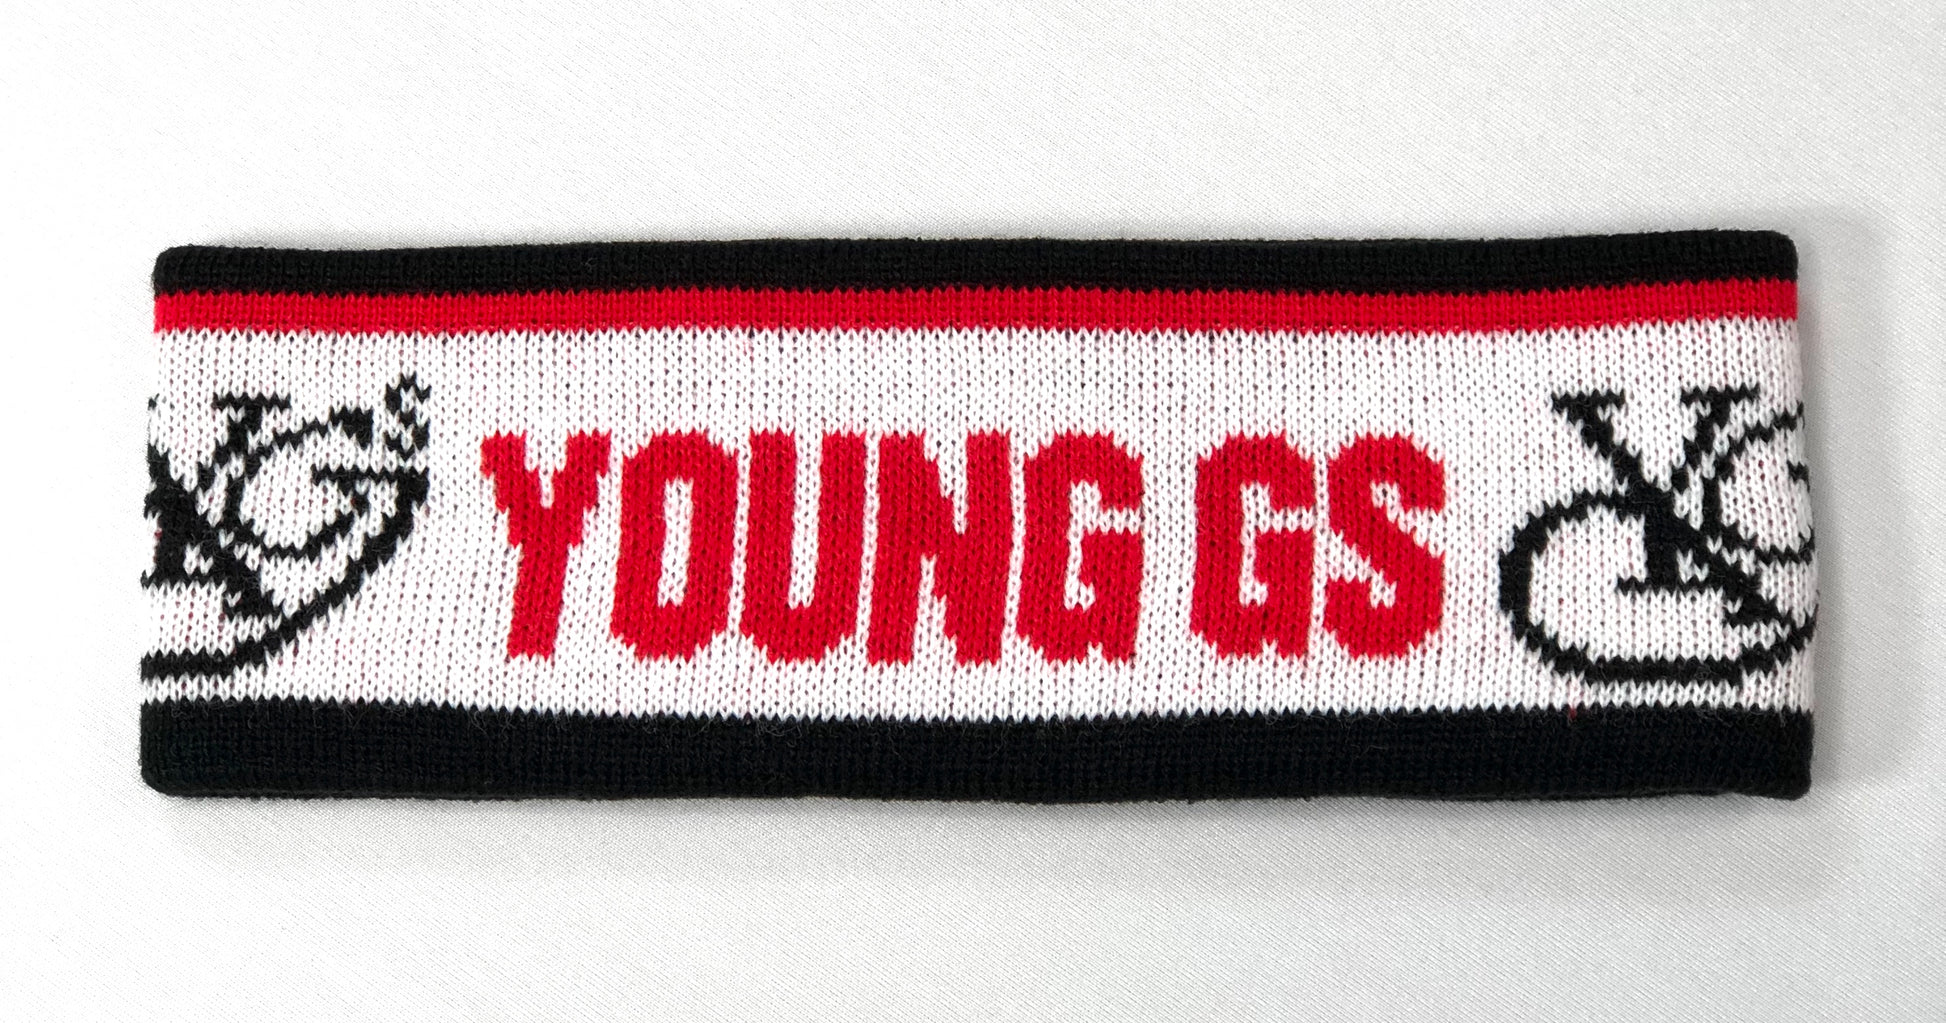 Young GS Headband - Young GS Clothing